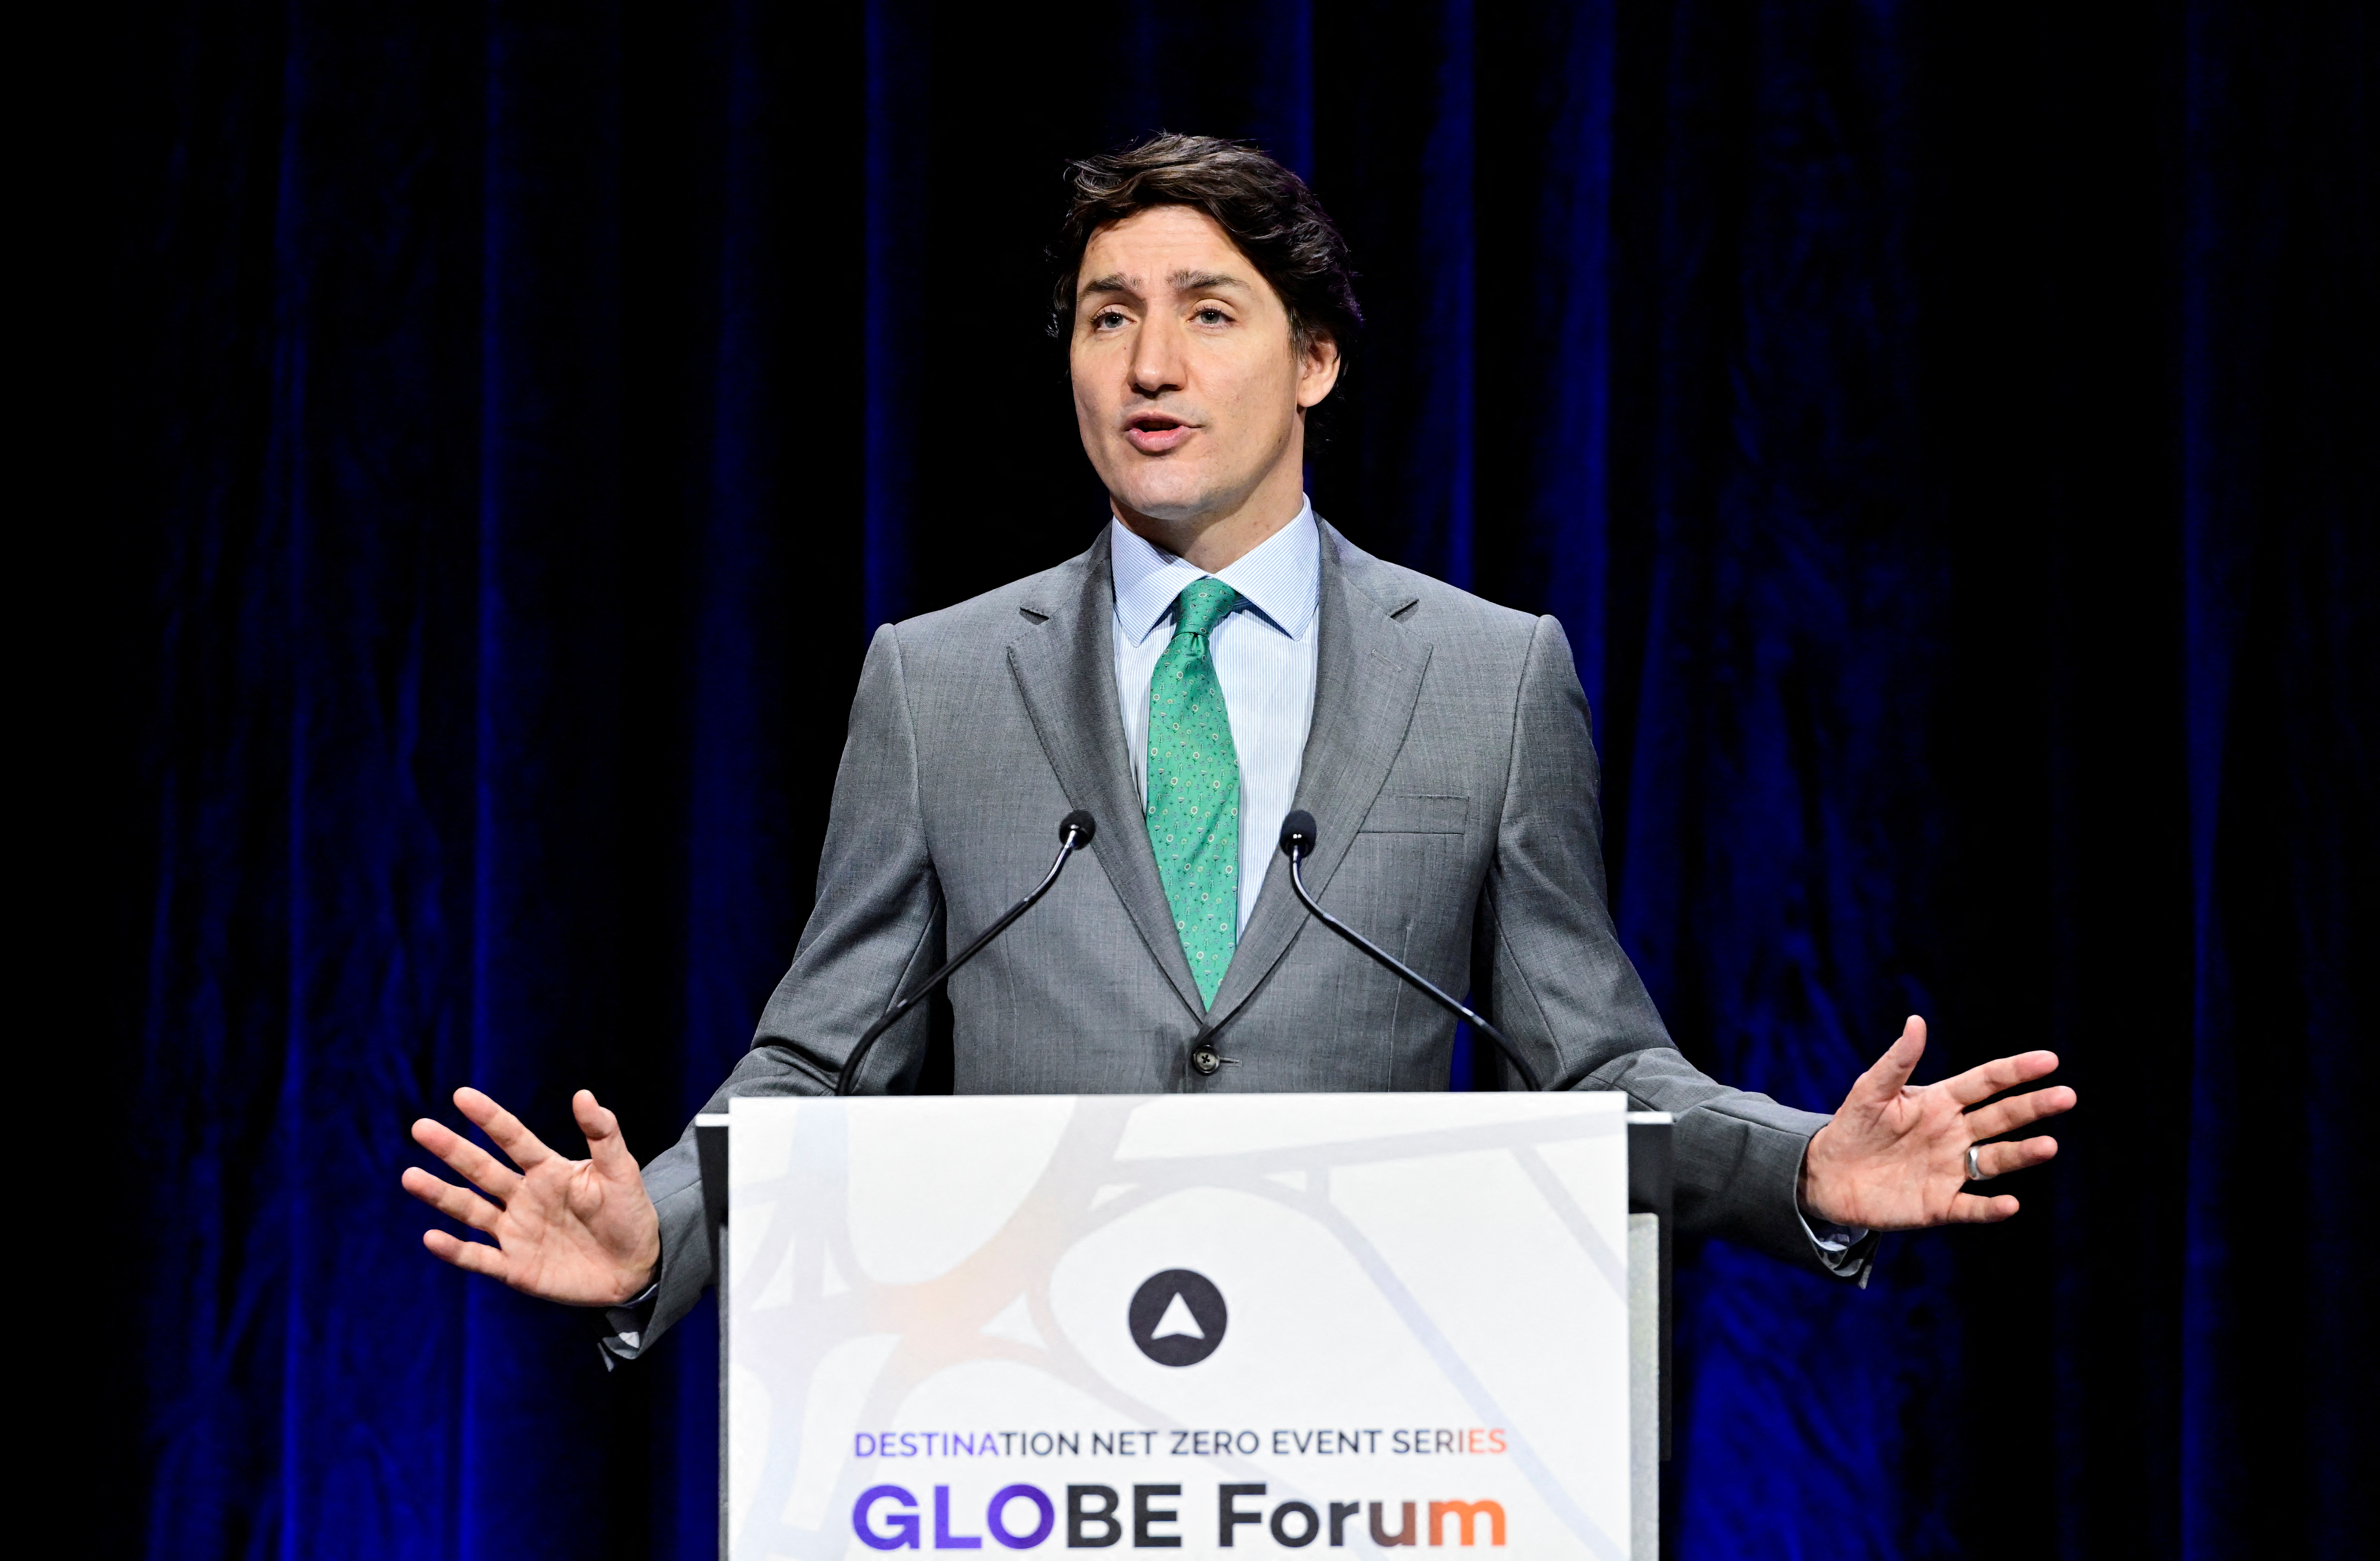 Canada's Prime Minister Trudeau makes a climate speech in Vancouver